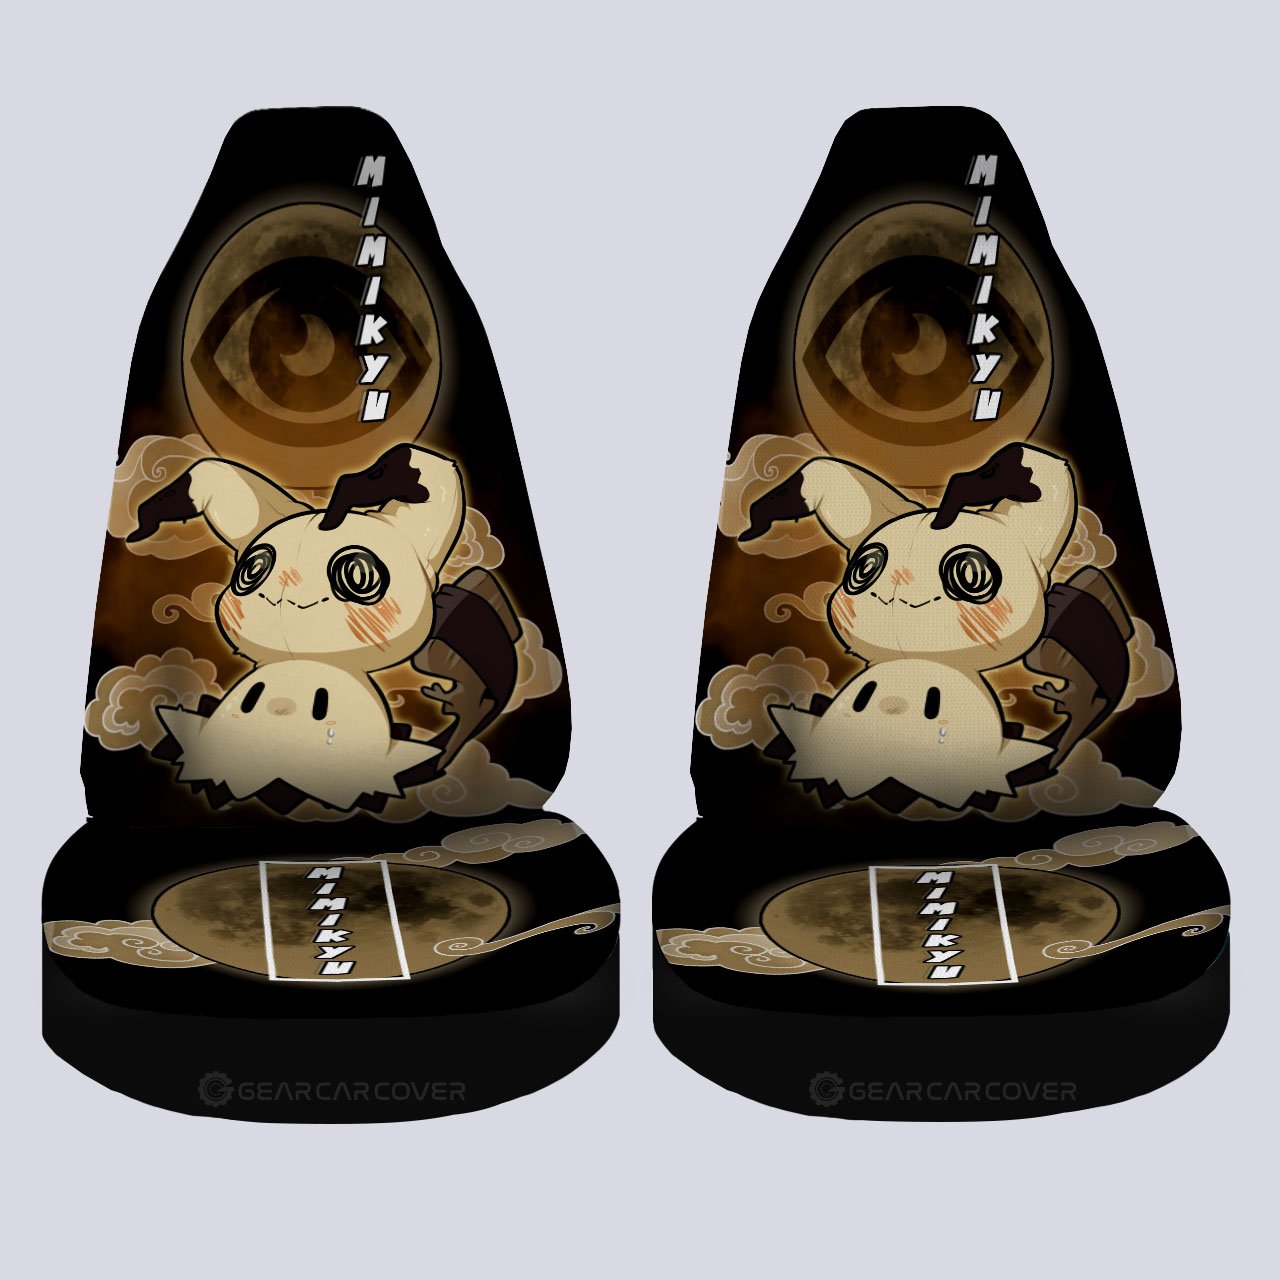 Mimikyu Car Seat Covers Custom Anime Car Accessories For Anime Fans - Gearcarcover - 4